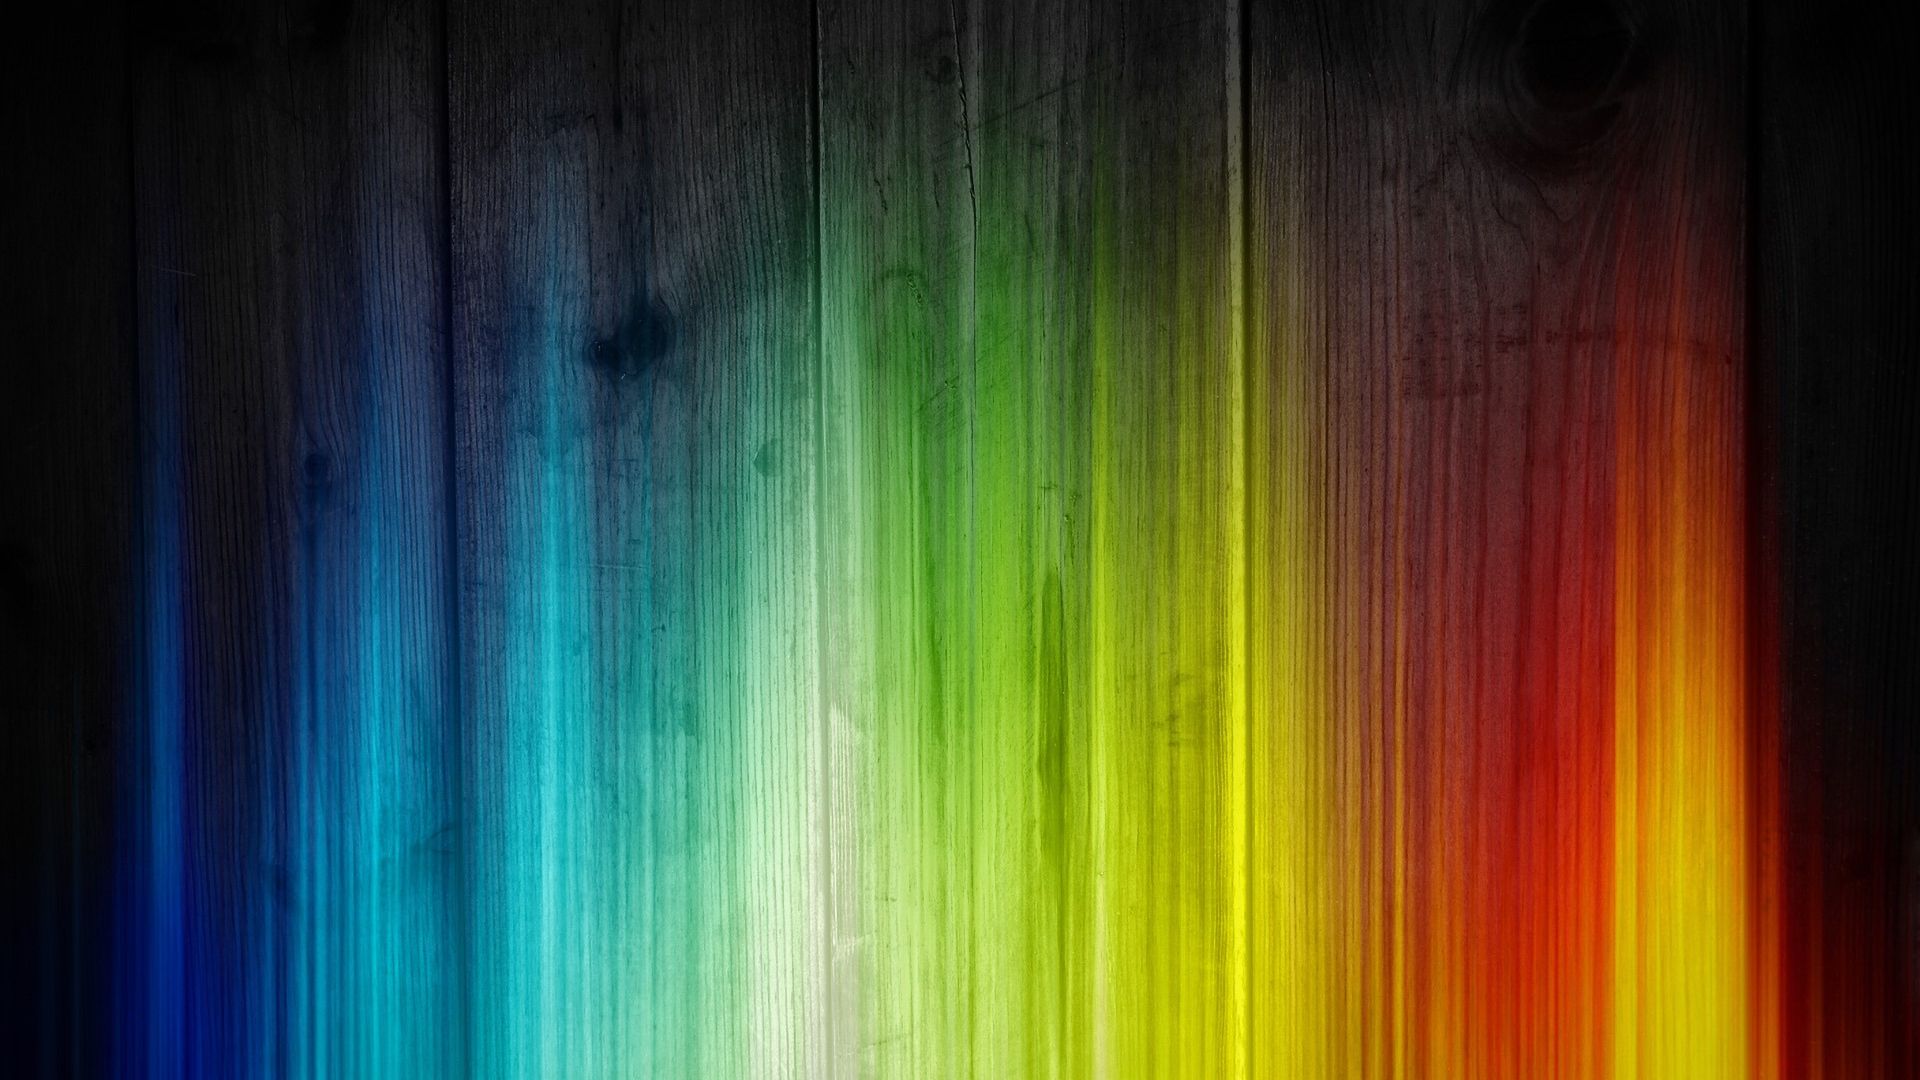 25 Hd Rainbow Wallpapers - Hd Colorful Wallpapers 1080p - HD Wallpaper 